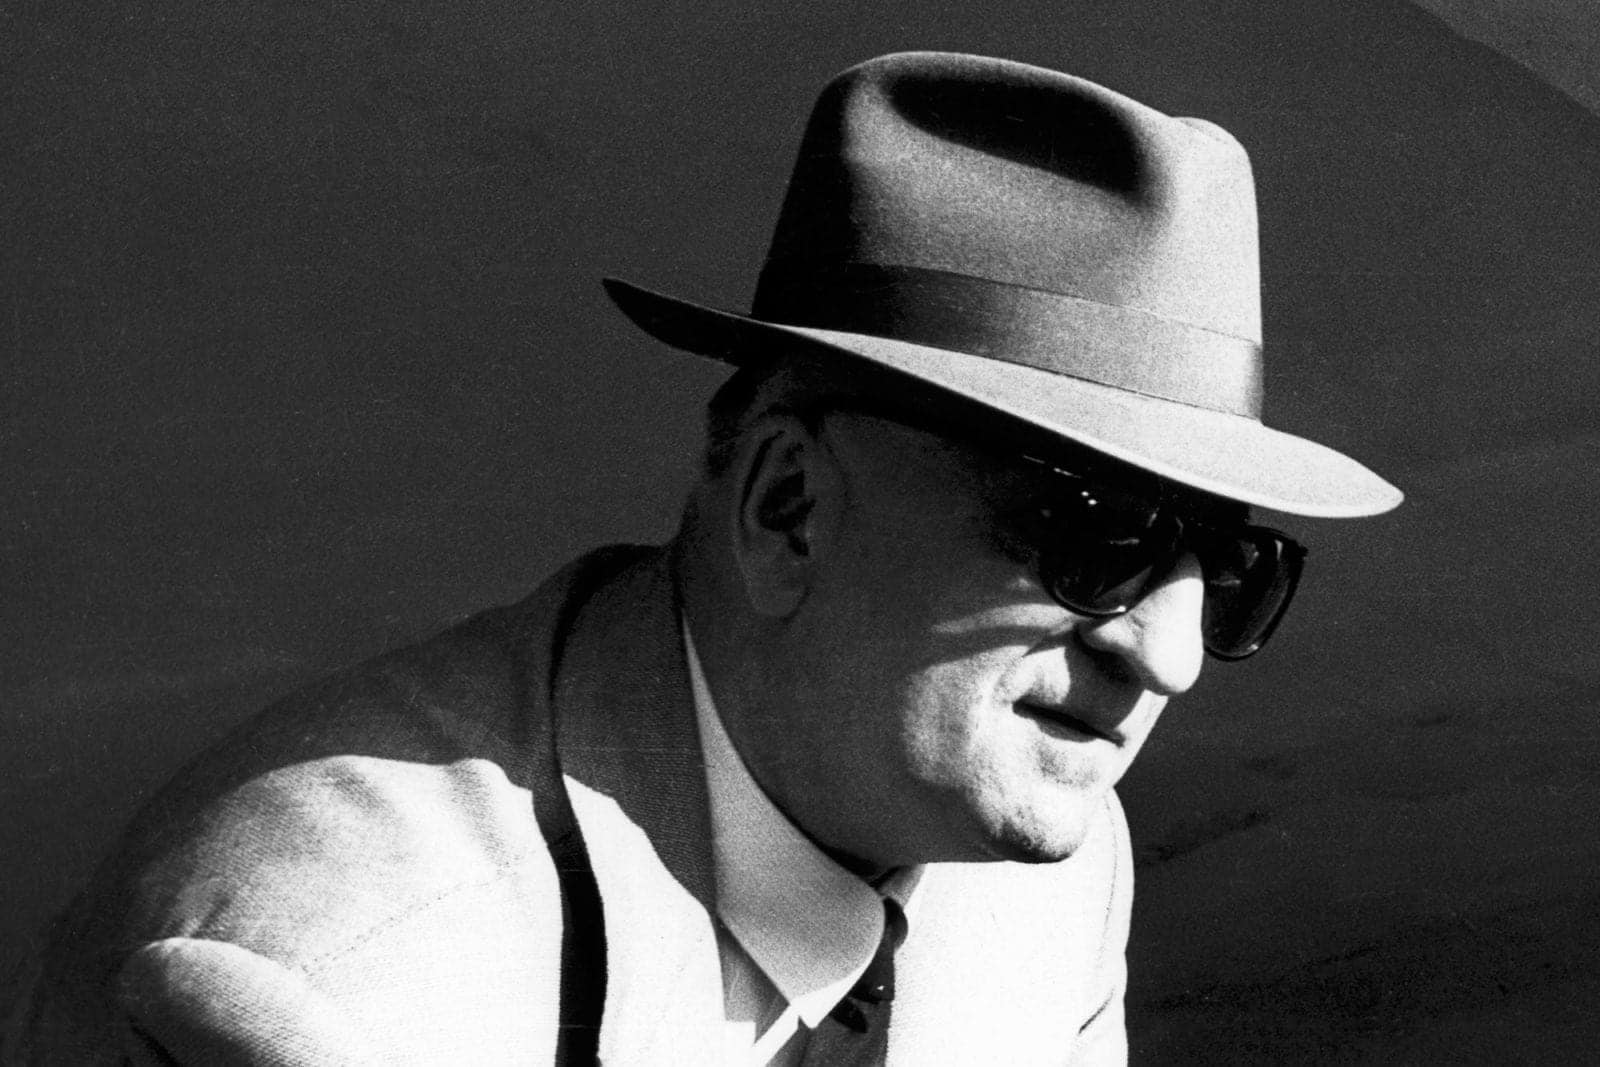 Enzo Ferrari, Grand Prix of Italy, Autodromo Nazionale Monza, 02 September 1956. (Photo by Bernard Cahier/Getty Images)